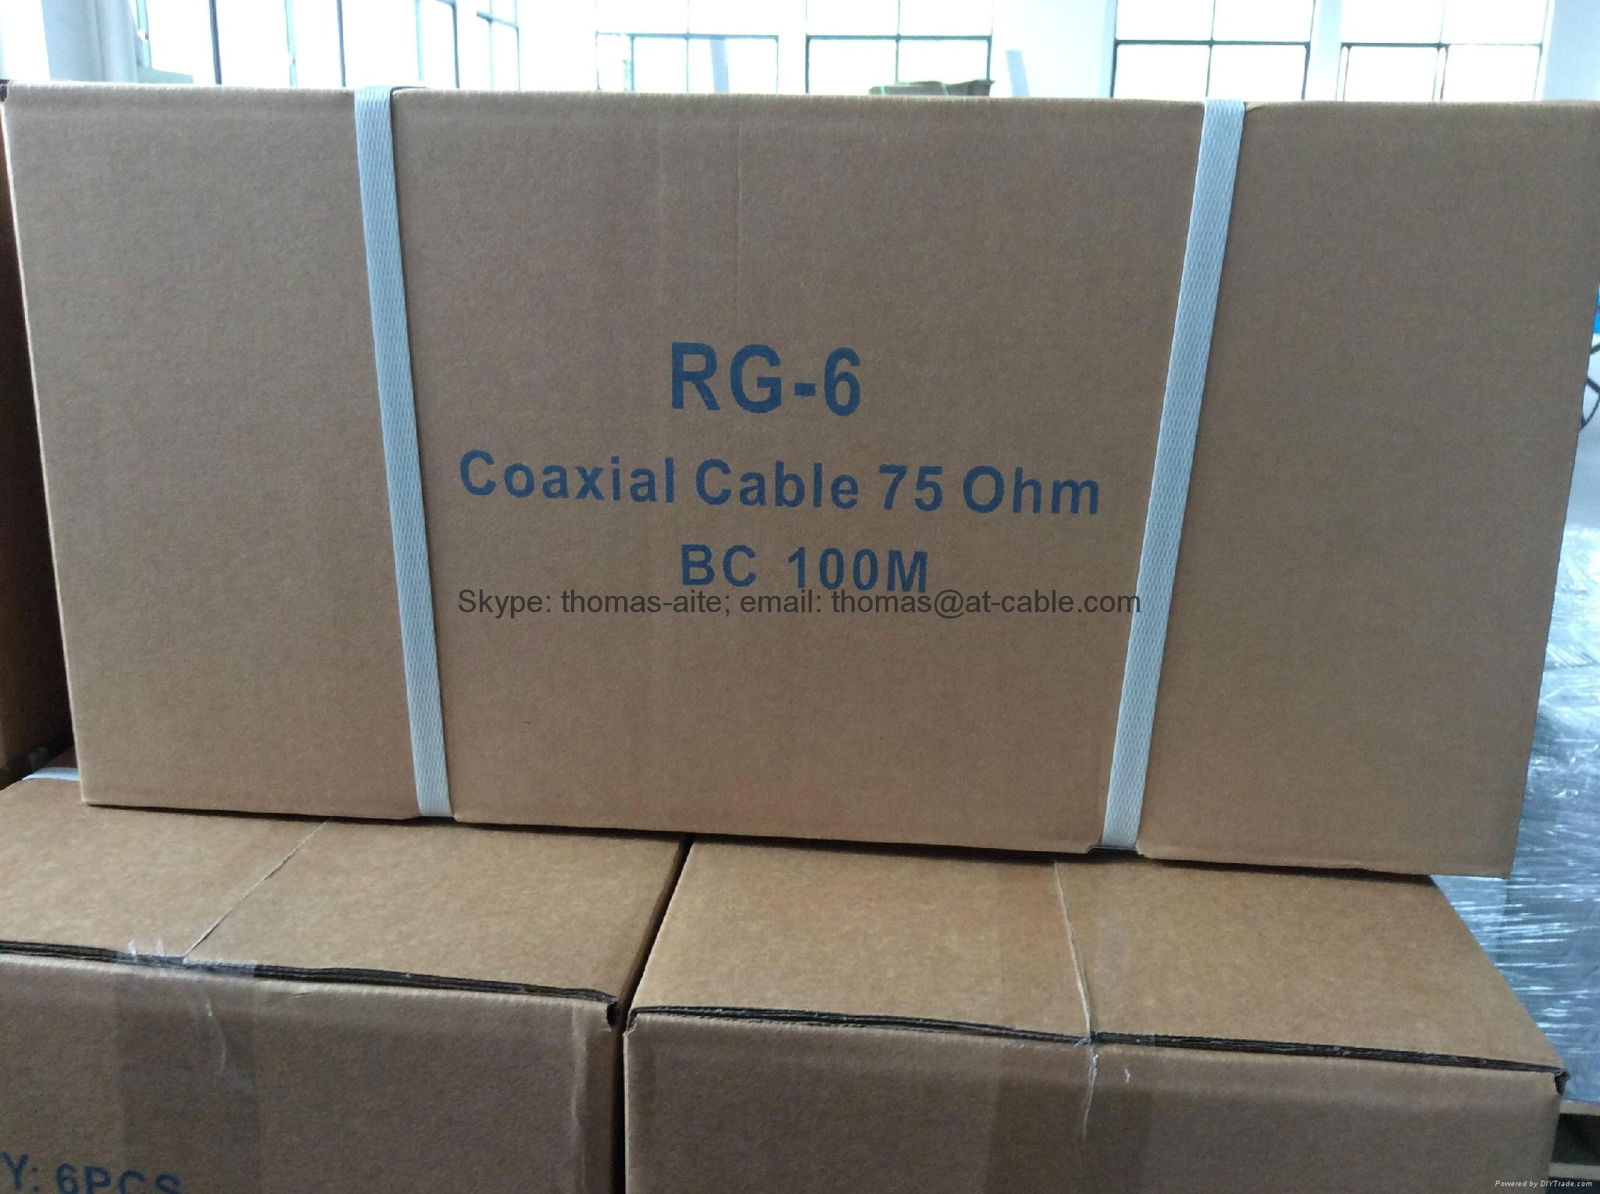 TV coaxial cable RG-6 BC 100M